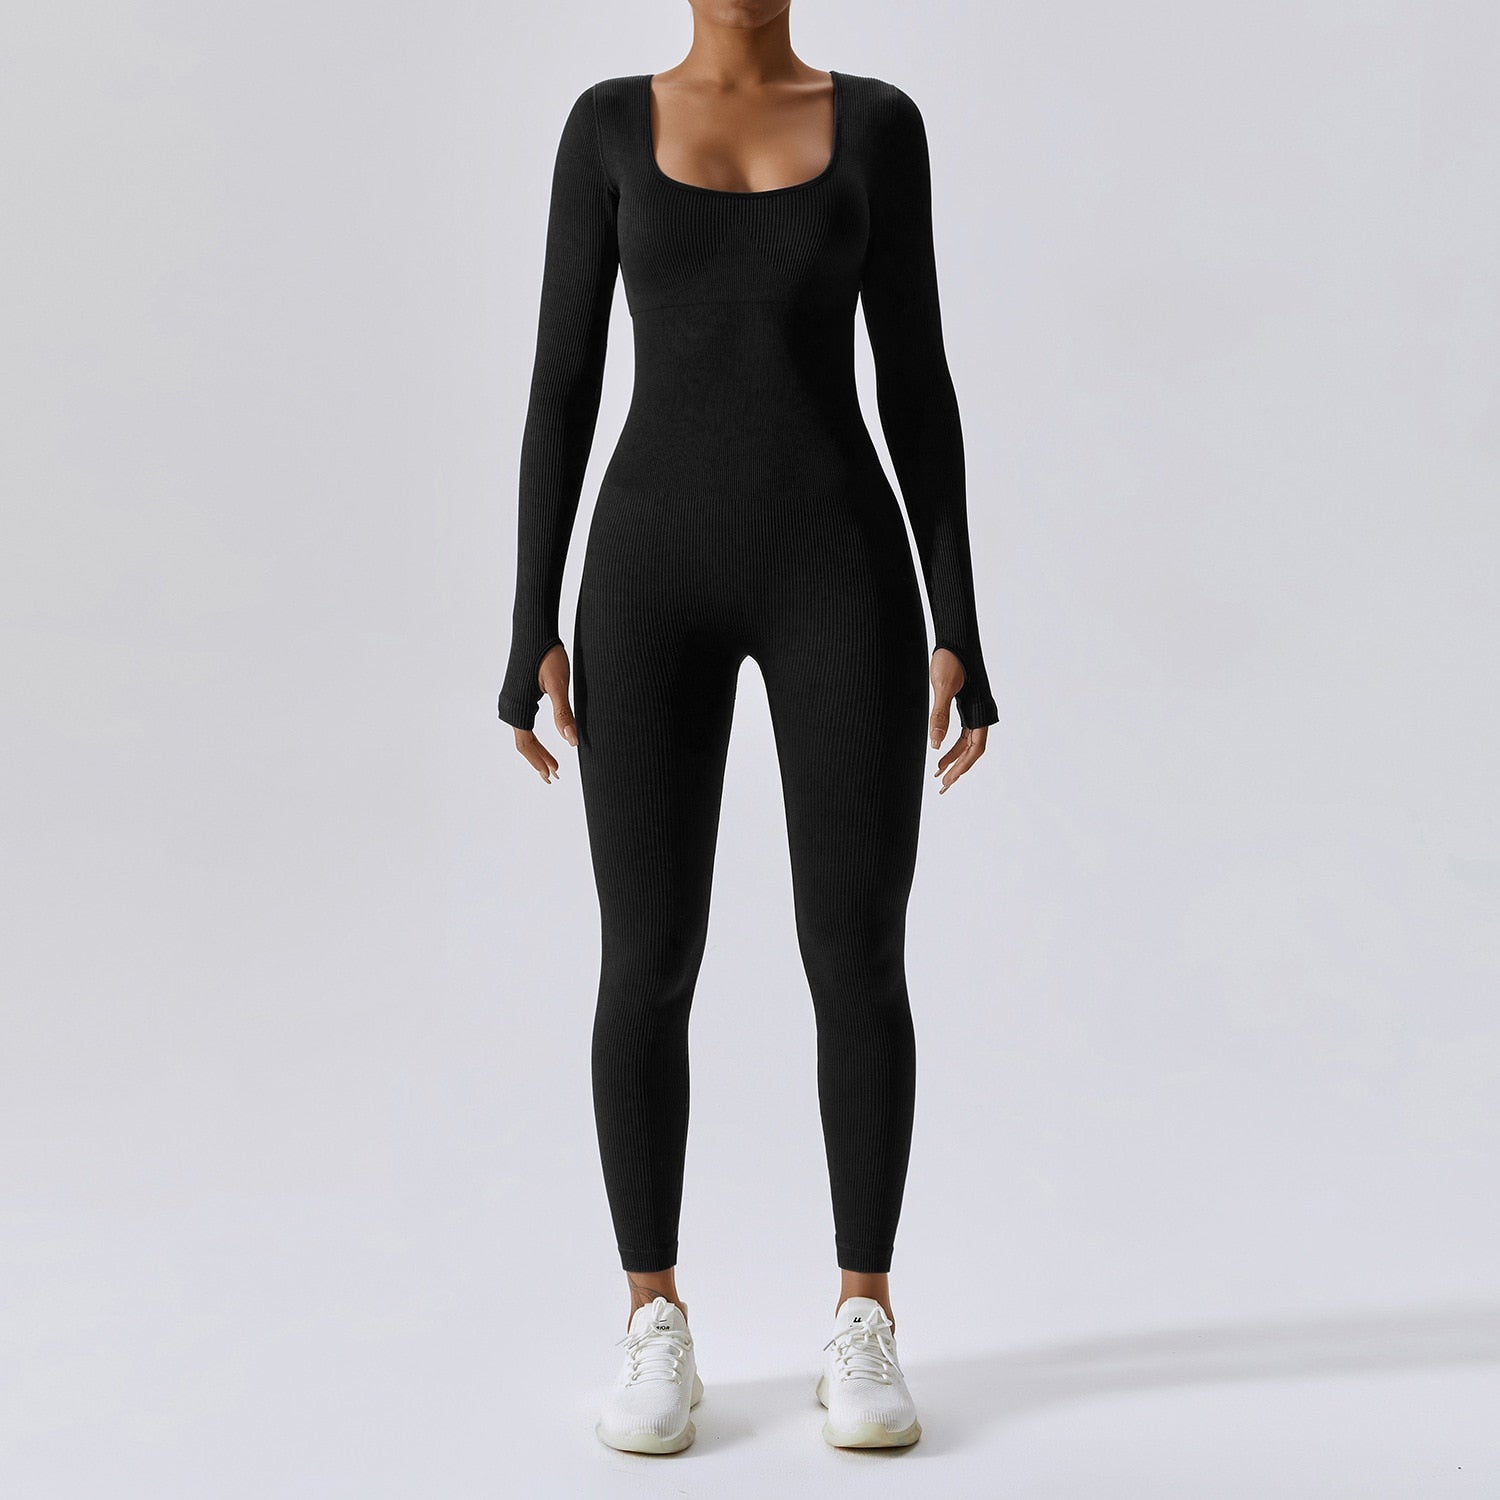 Experience Unmatched Freedom and Style with our Seamless Yoga Suit